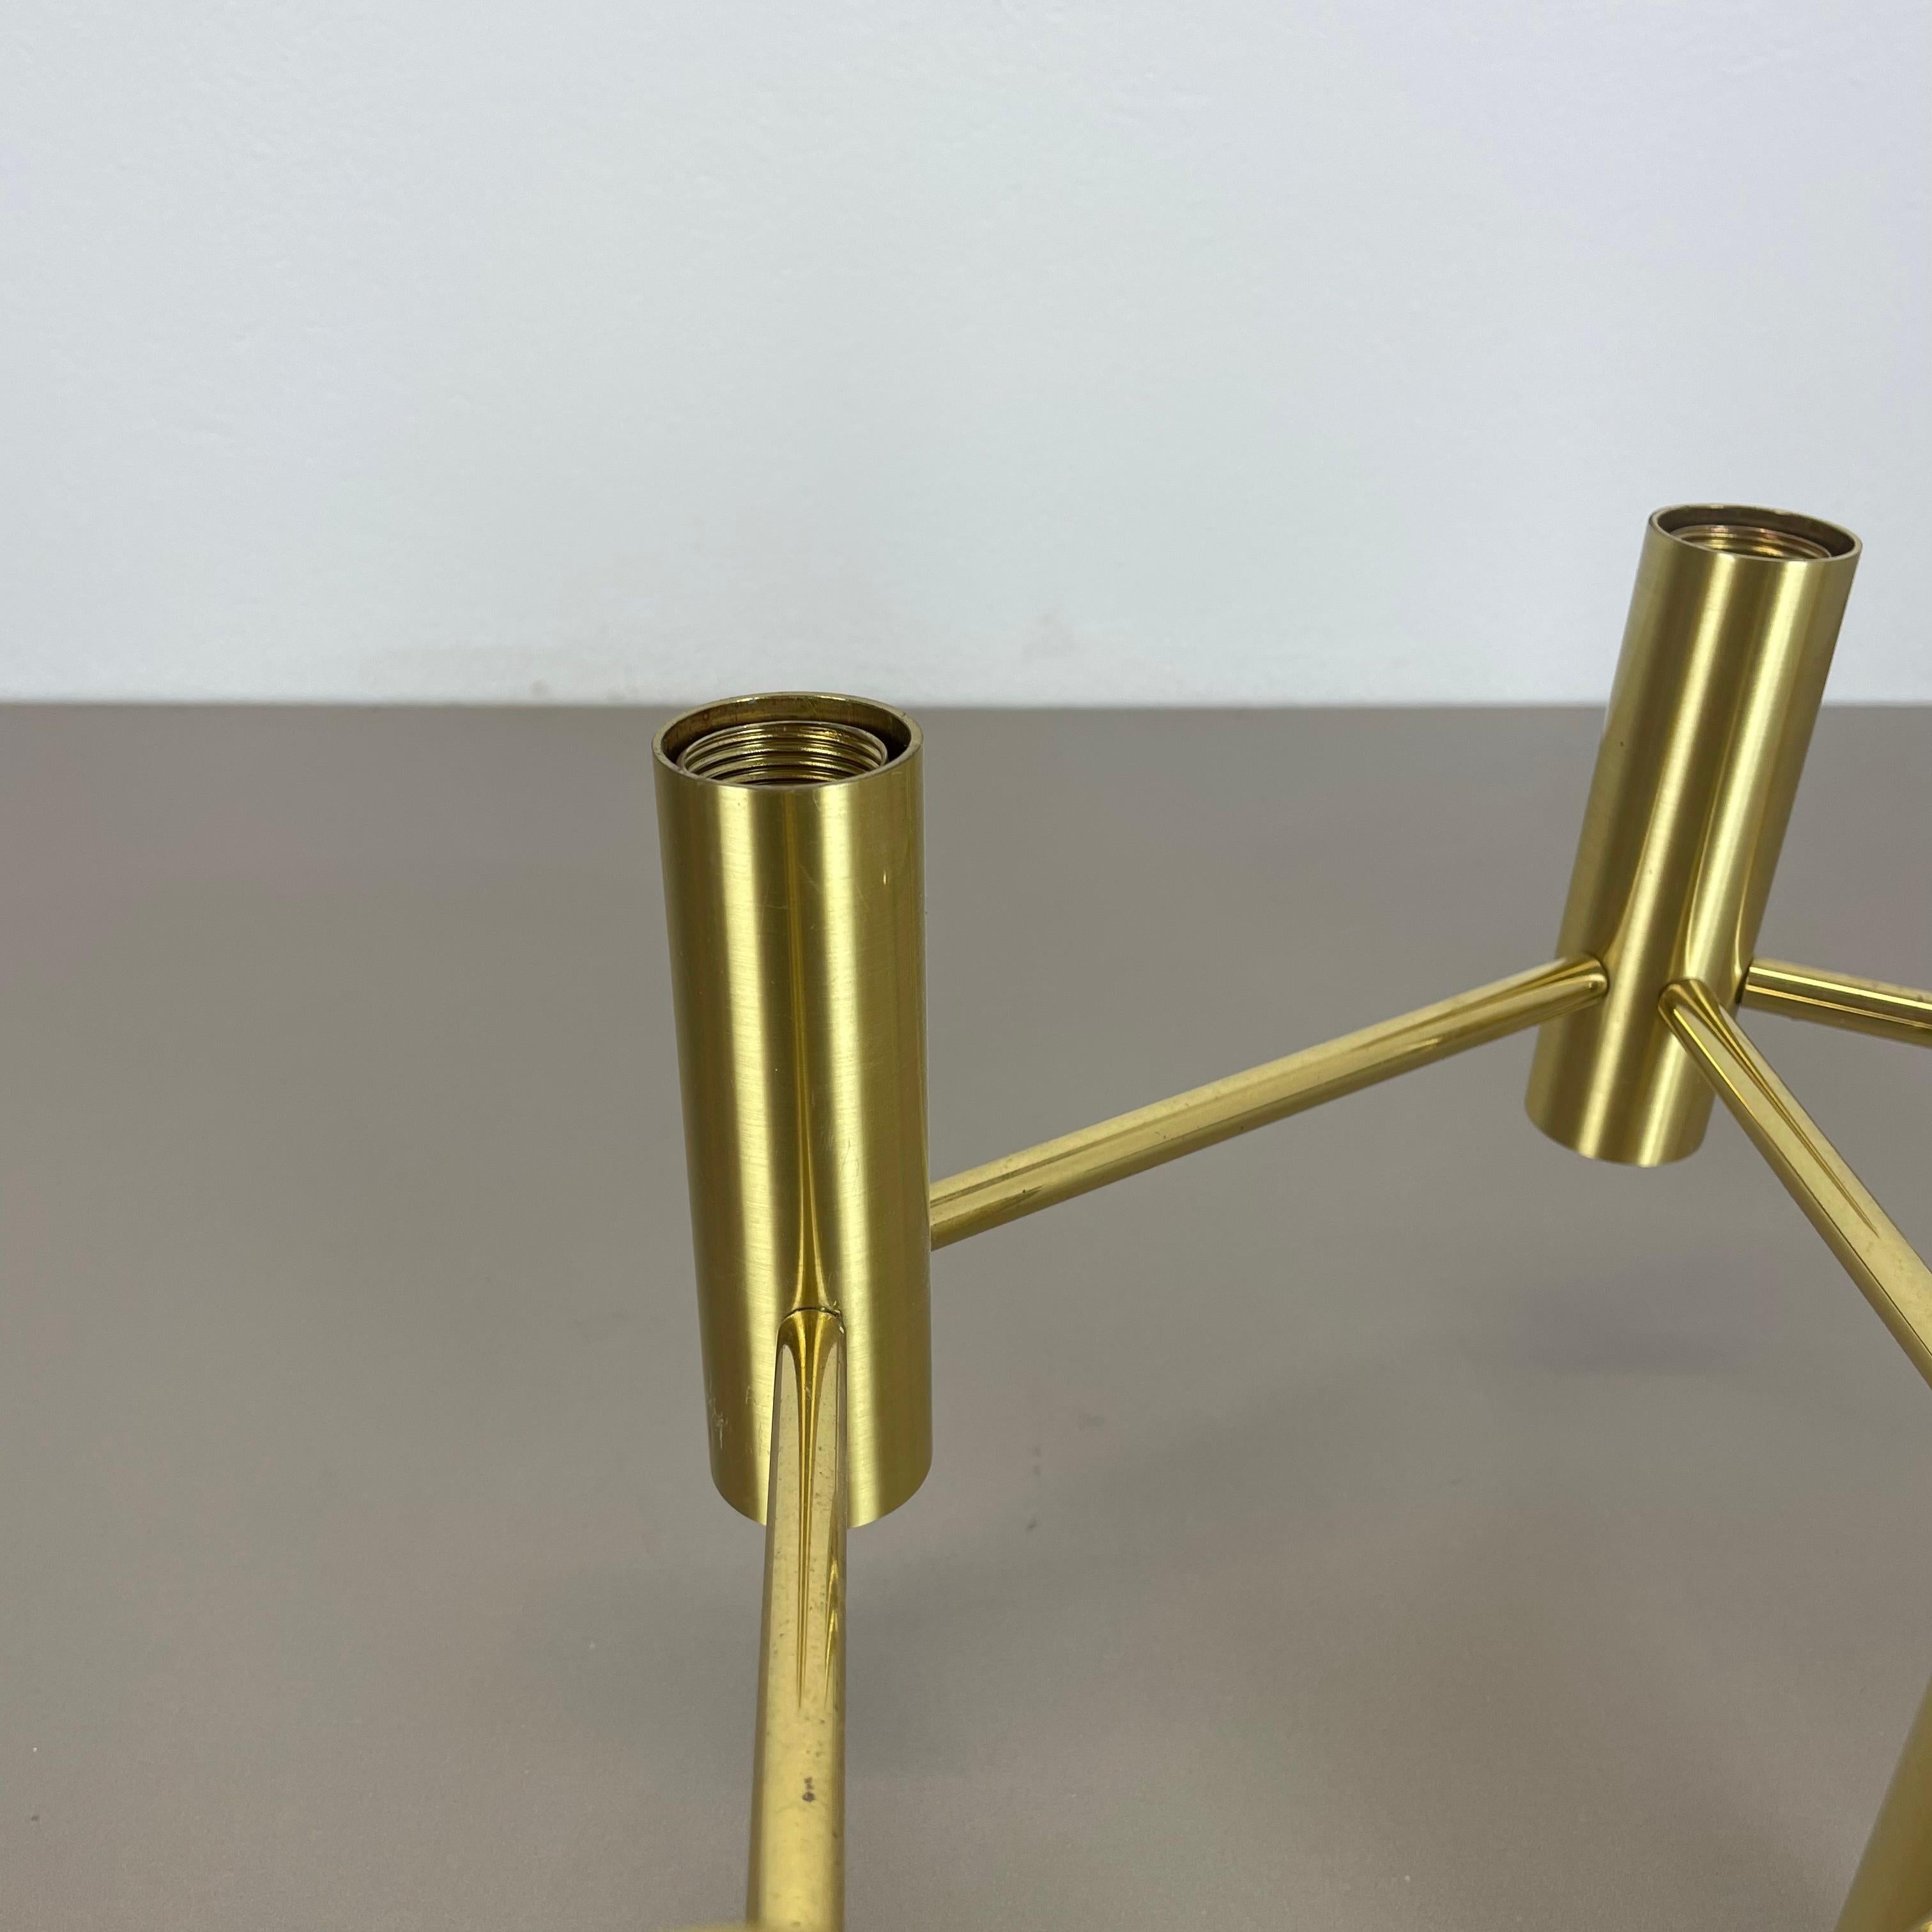 Brass Italian Stilnovo Style Atomic Space Age Ceiling Light Sconces, Italy, 1970 For Sale 10